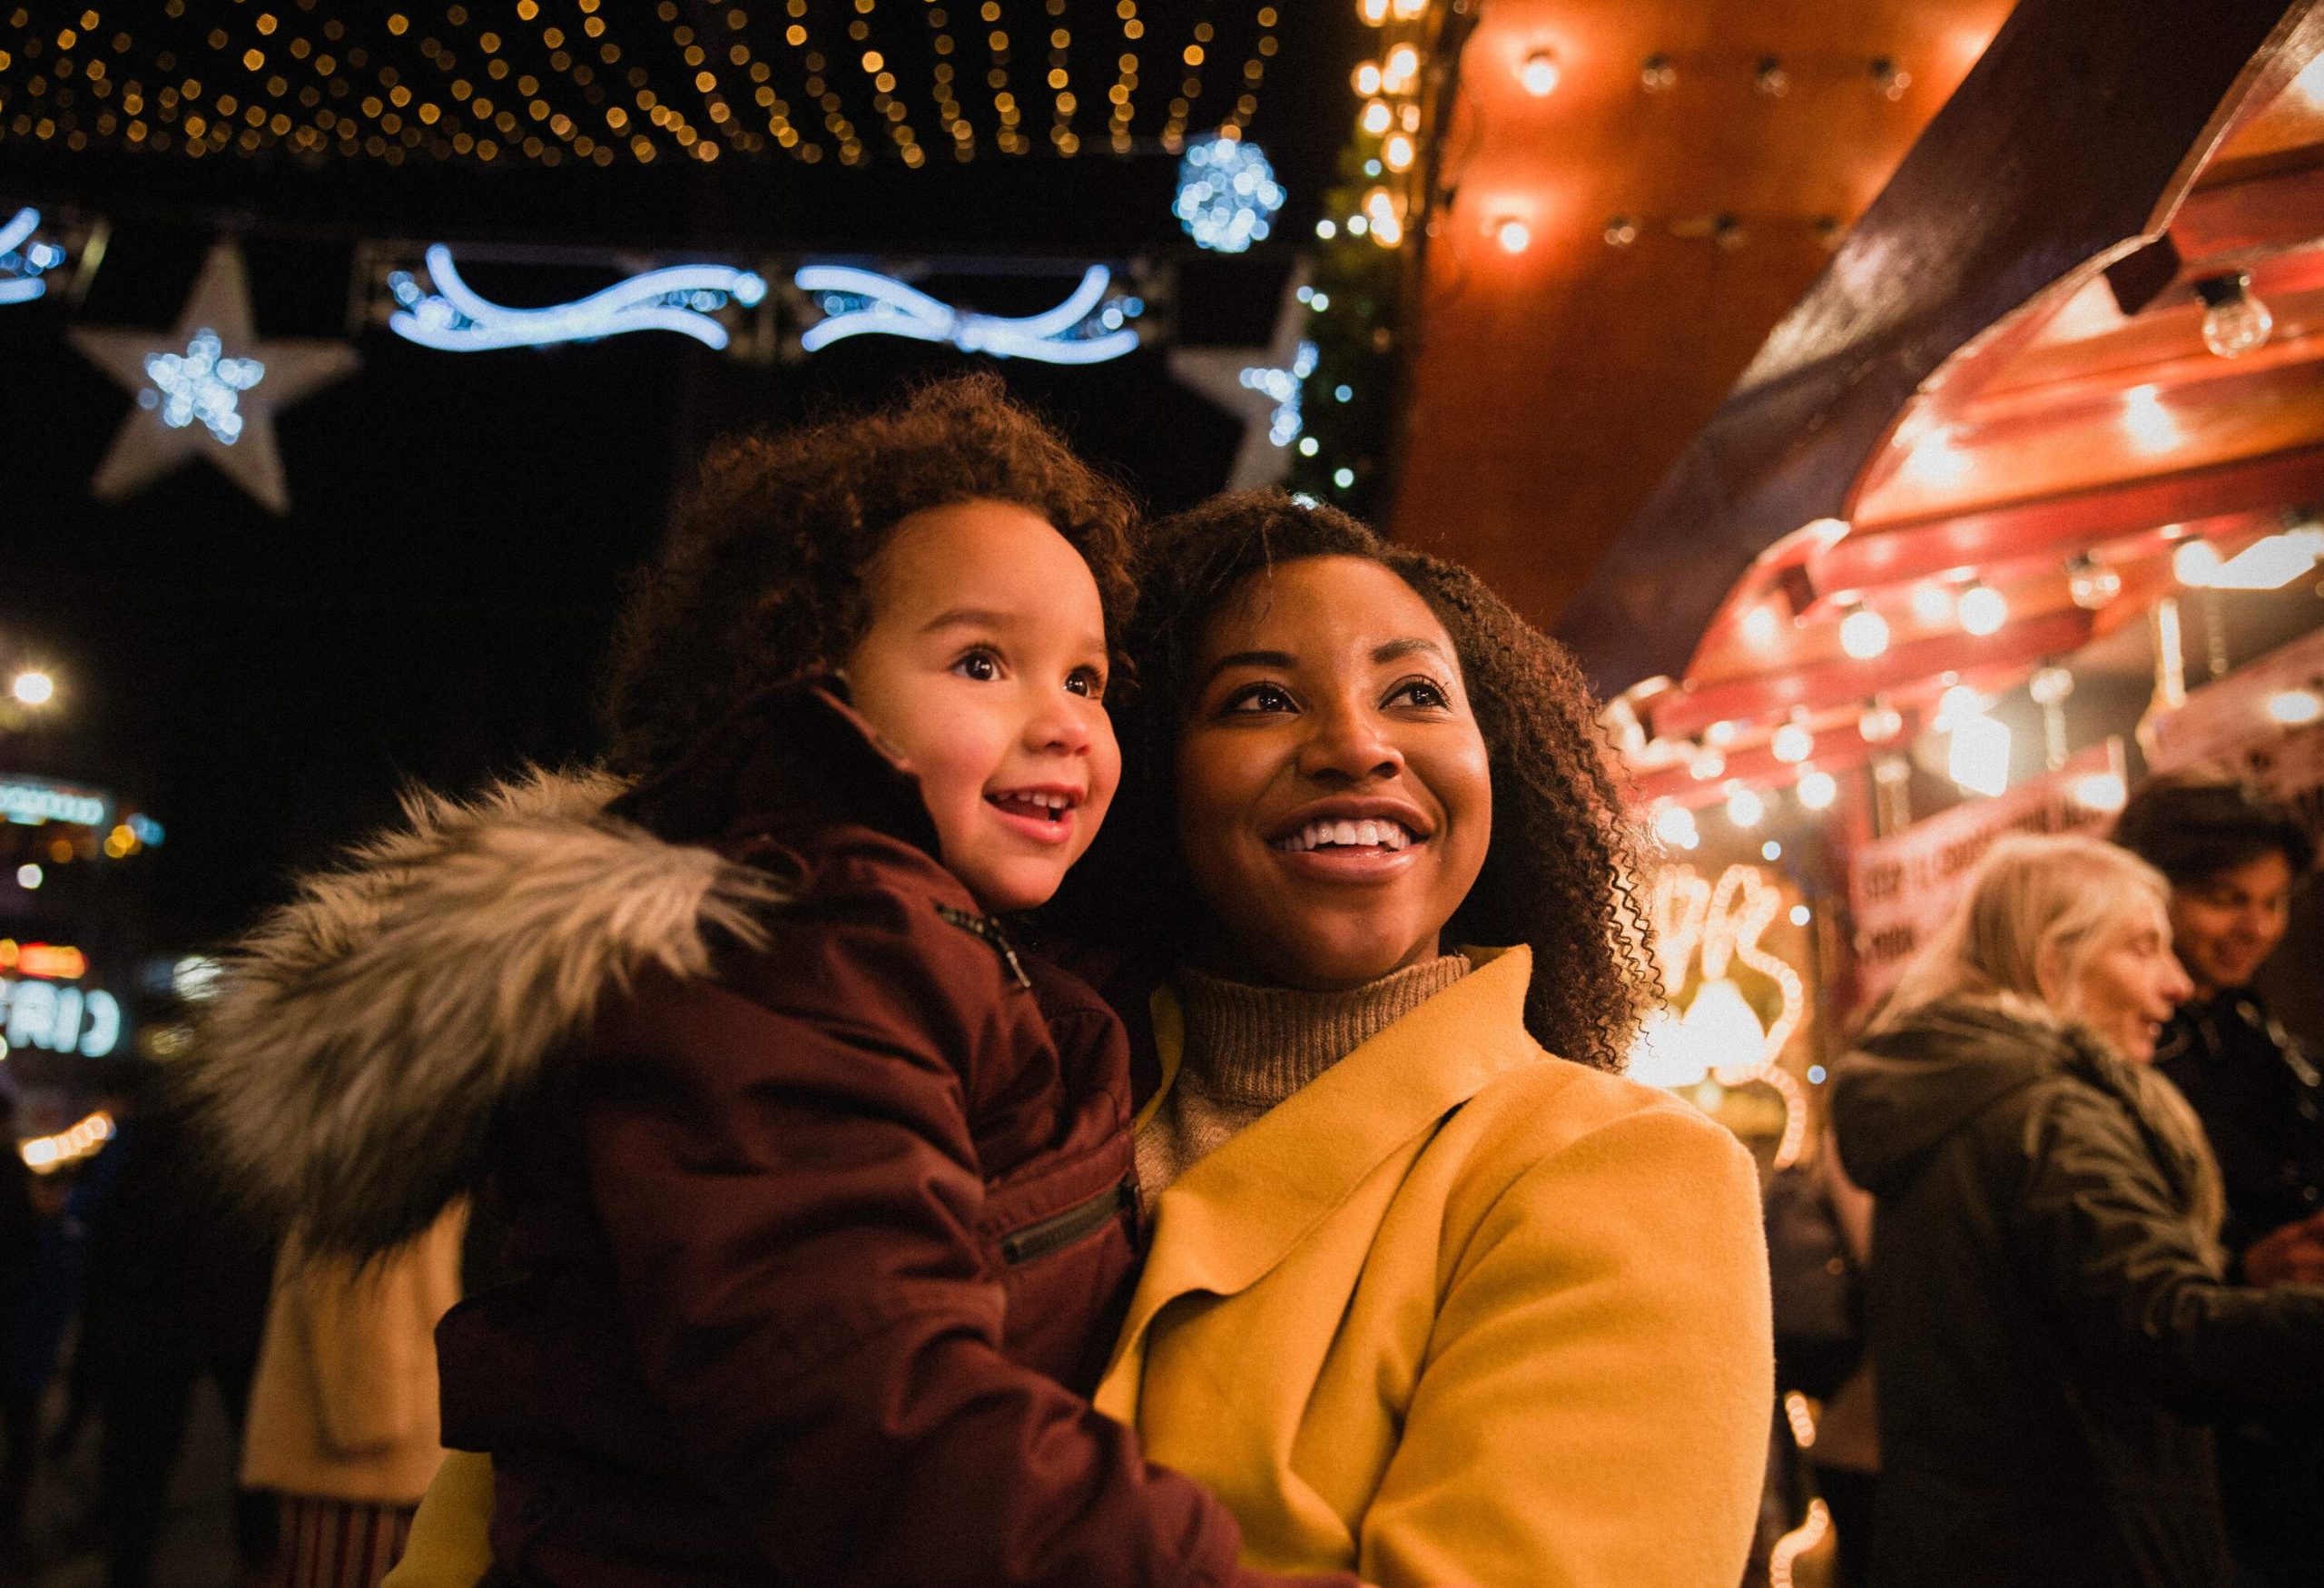 Smiling woman holding her child with a look of awe against the background of colourfully illuminated lights.